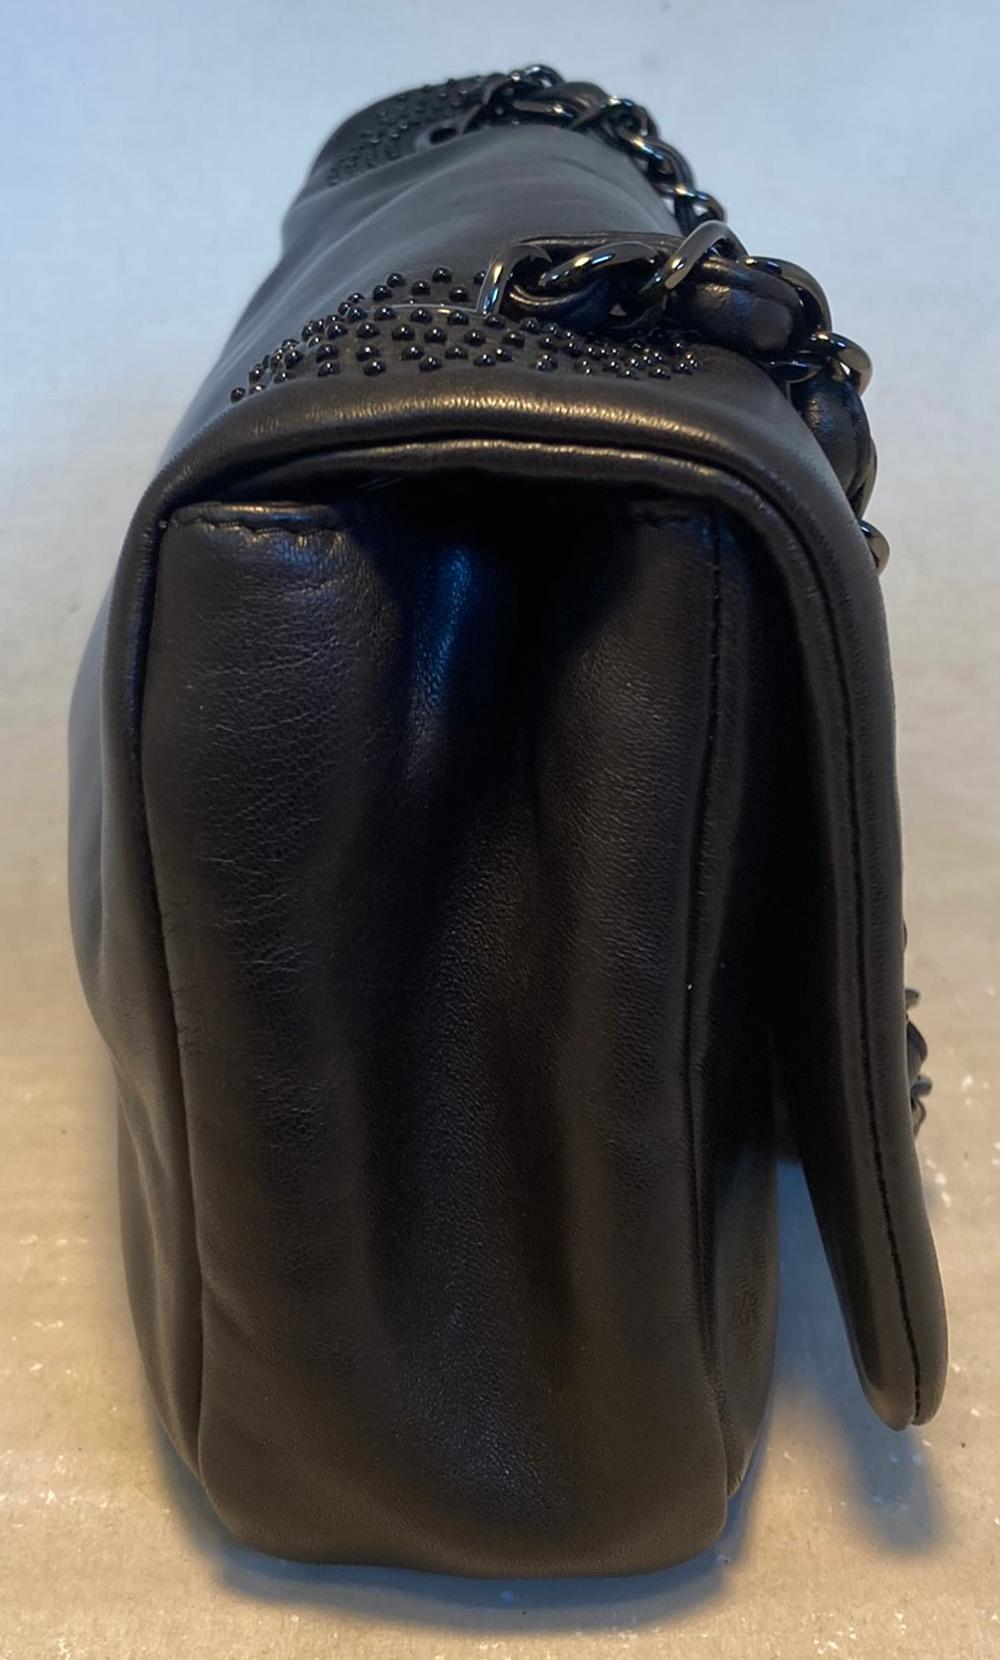 Chanel Black Leather Beaded CC Top Flap Classic Shoulder Bag in excellent condition. Soft black lambskin leather exterior trimmed with delicate black beaded CC logo along front top flap and around each end of shoulder strap. Woven gunmetal chain and